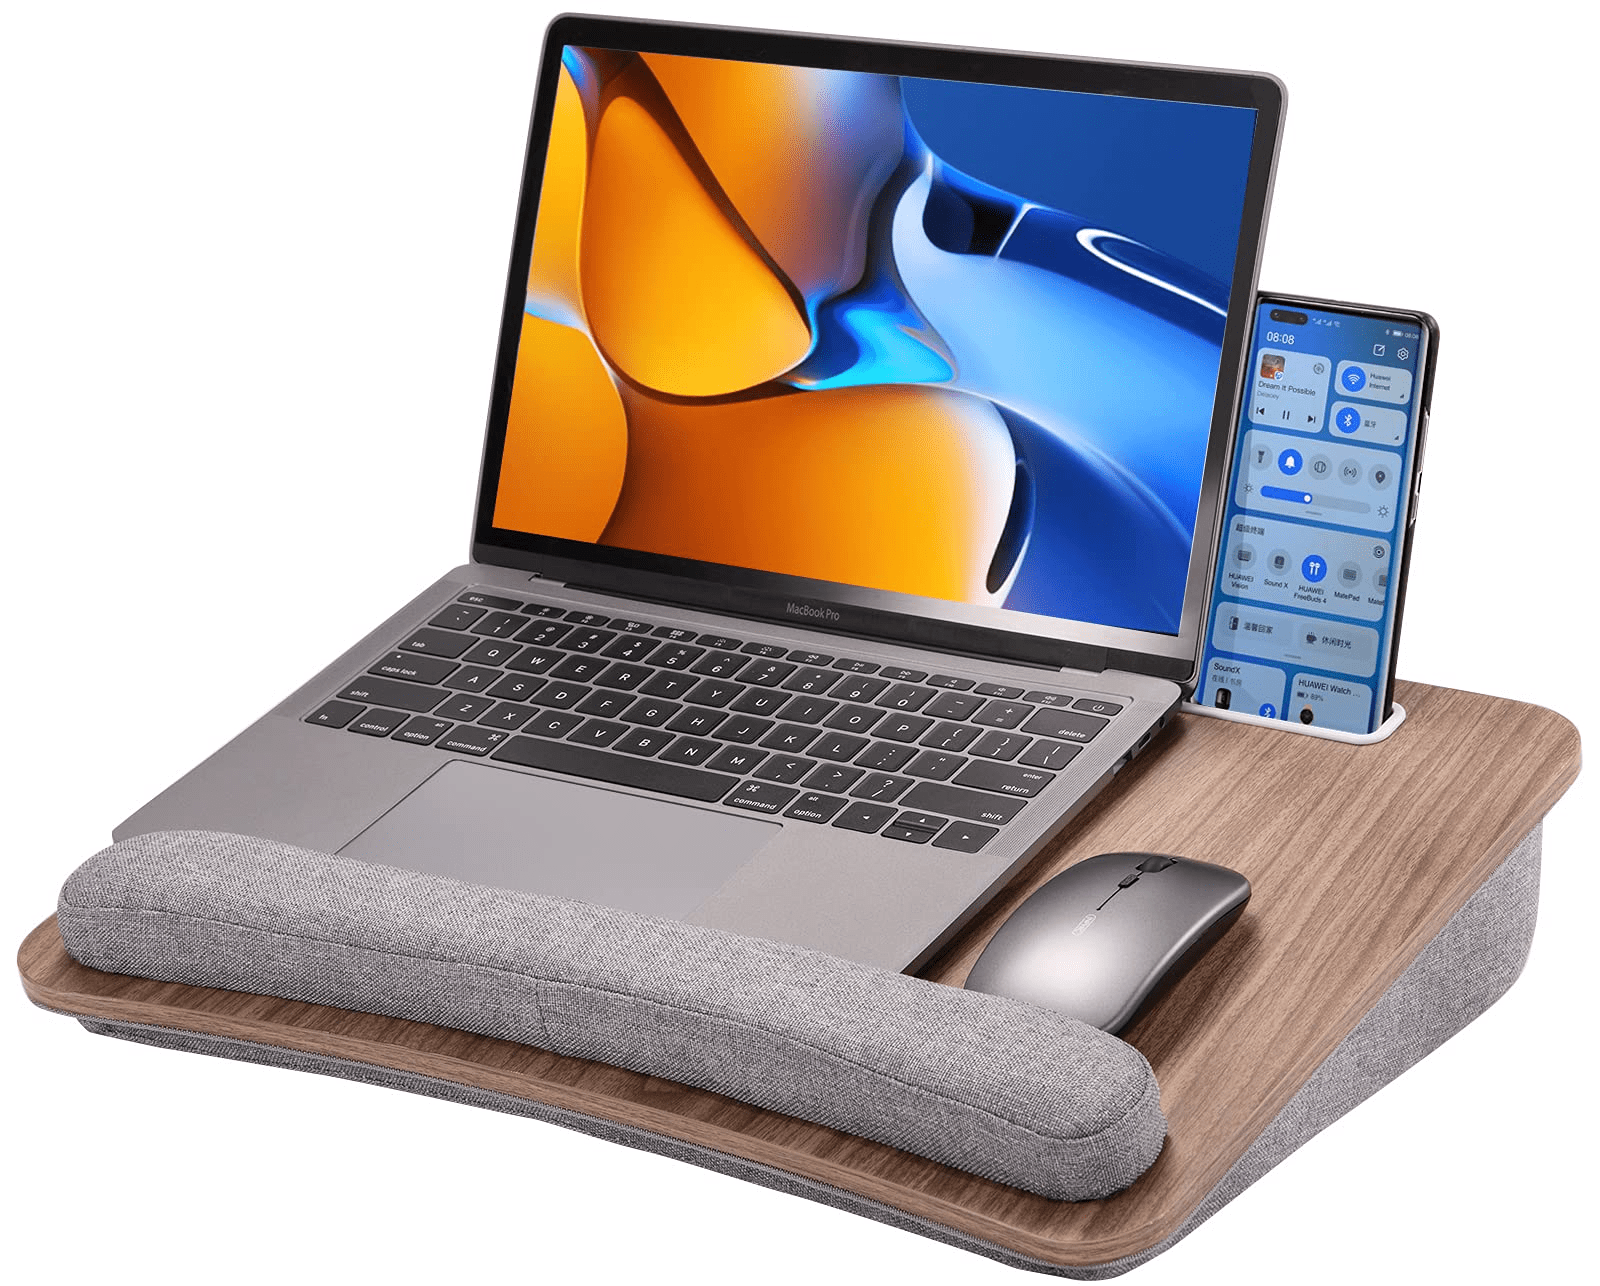 Lap Laptop Desk -Portable Lap Desk with Pillow Cushion, Fits up to 15.6  inch Laptop, with Anti-Slip Strip & Storage Function for Home Office  Students